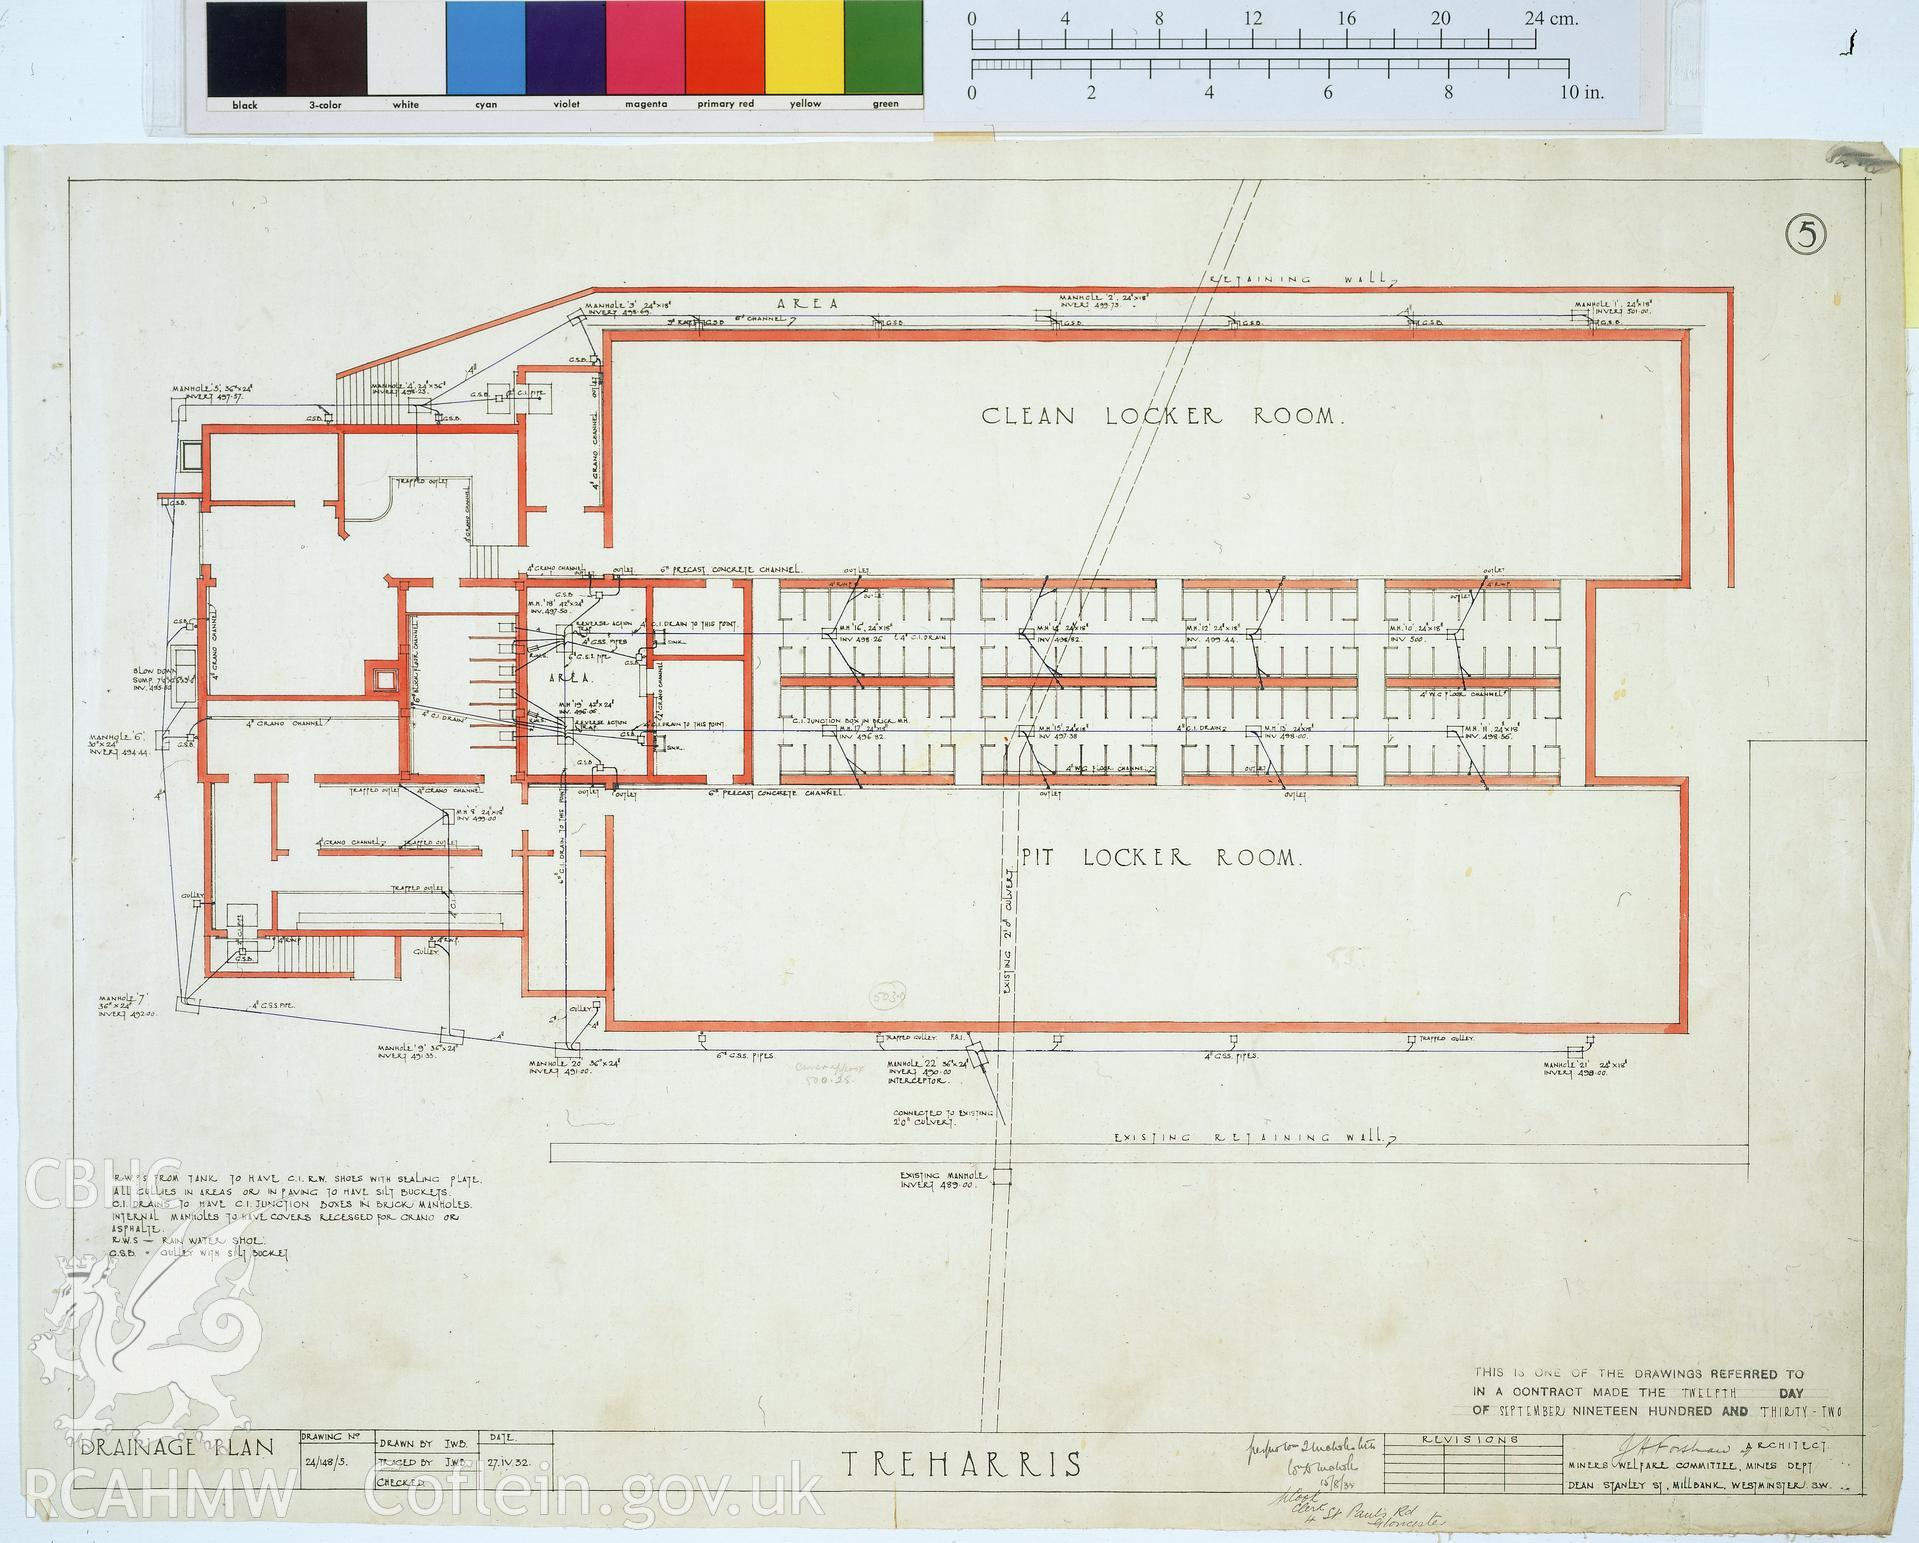 Colour transparency of a measured drawing showing the site drainage plan of the Bath House at  Ocean Deep Navigation Colliery , by J.H. Forshaw, Architect, 1932, from originals currently held by Gwent Record Office pending distribution to relevant county.